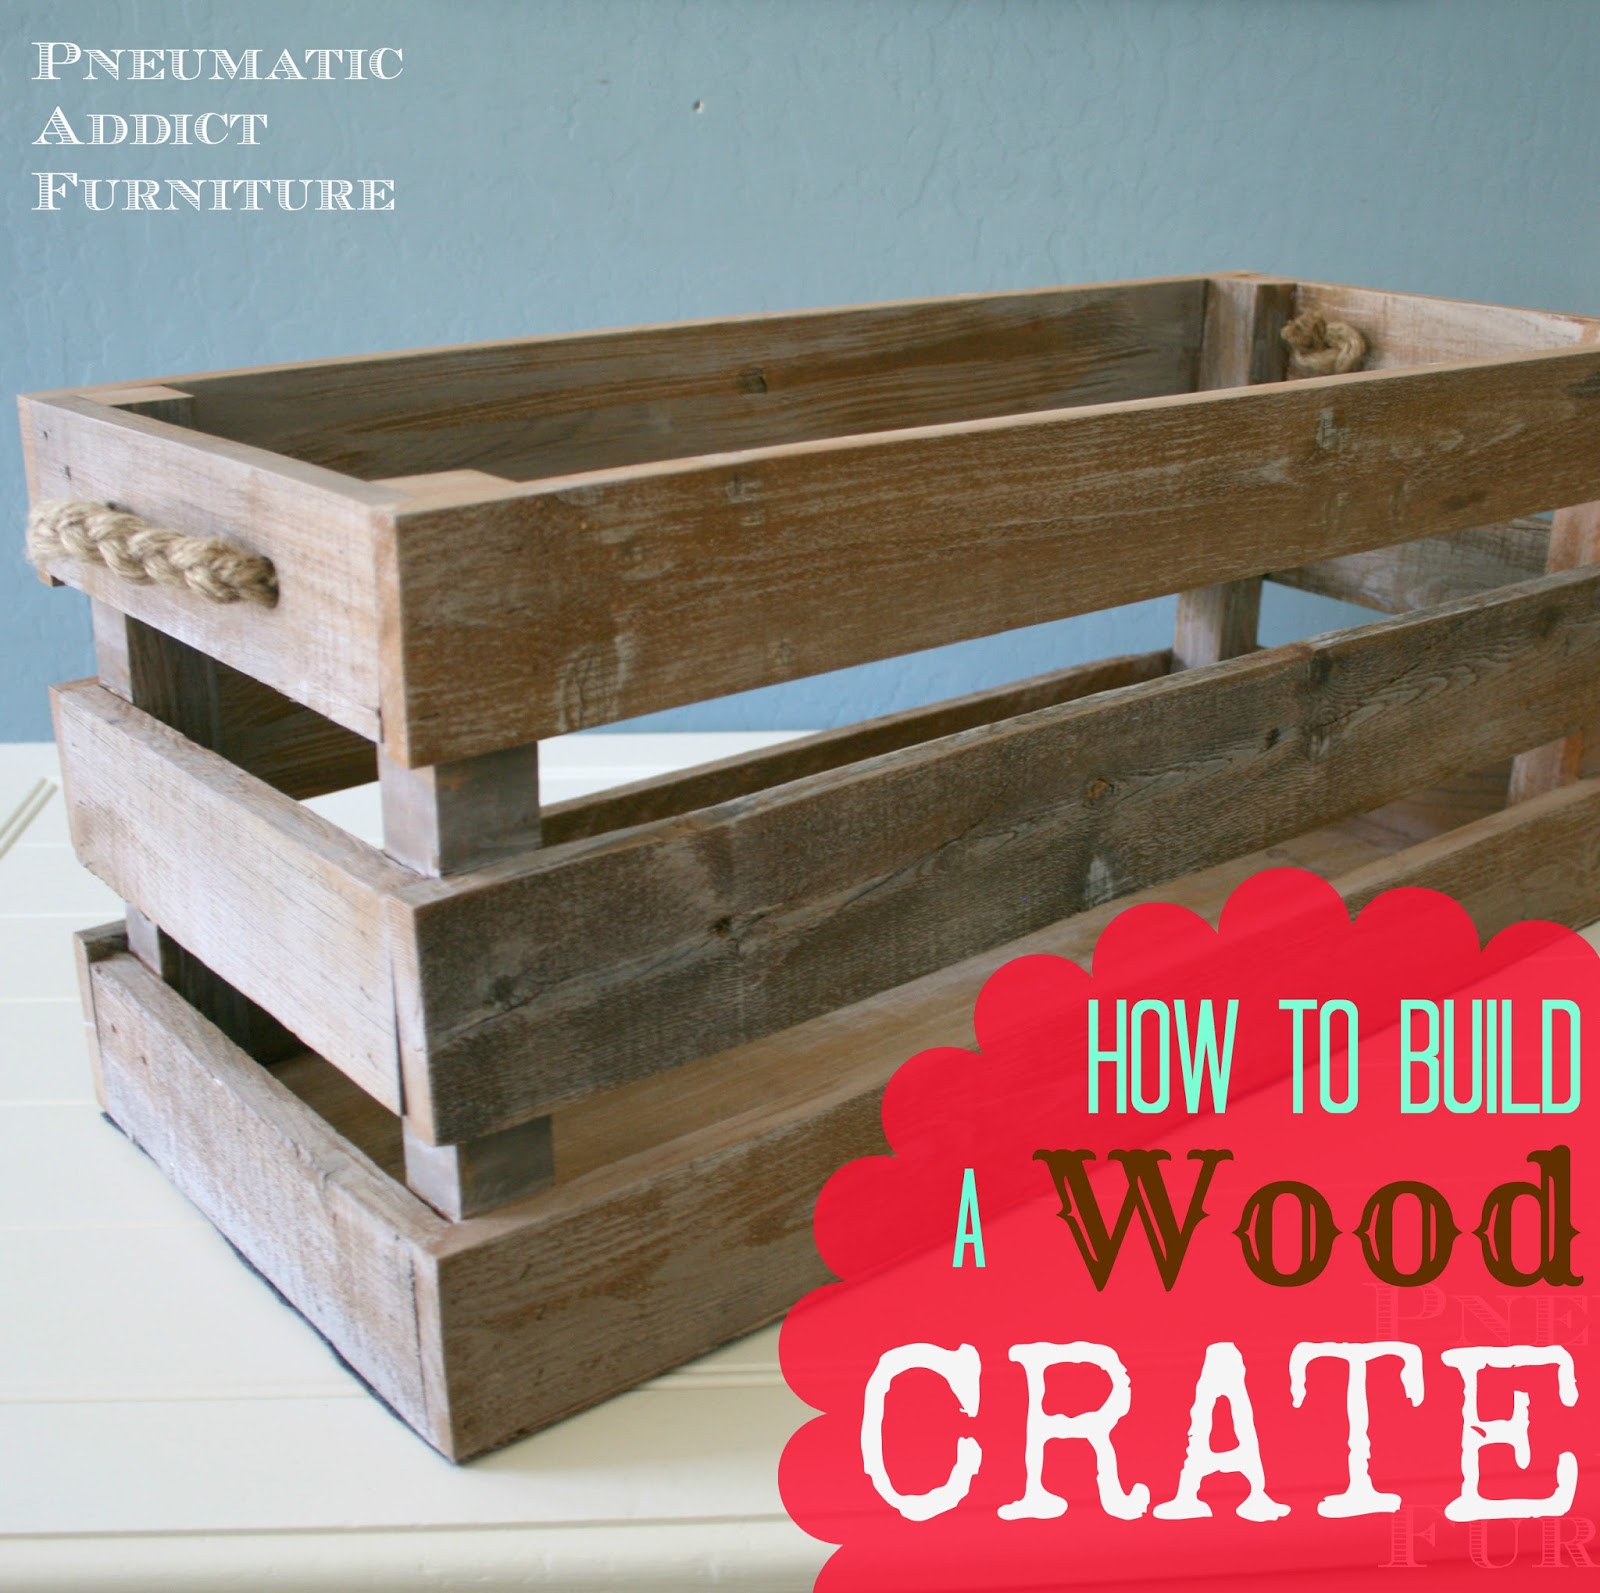 how to build a wood crate pneumatic addict